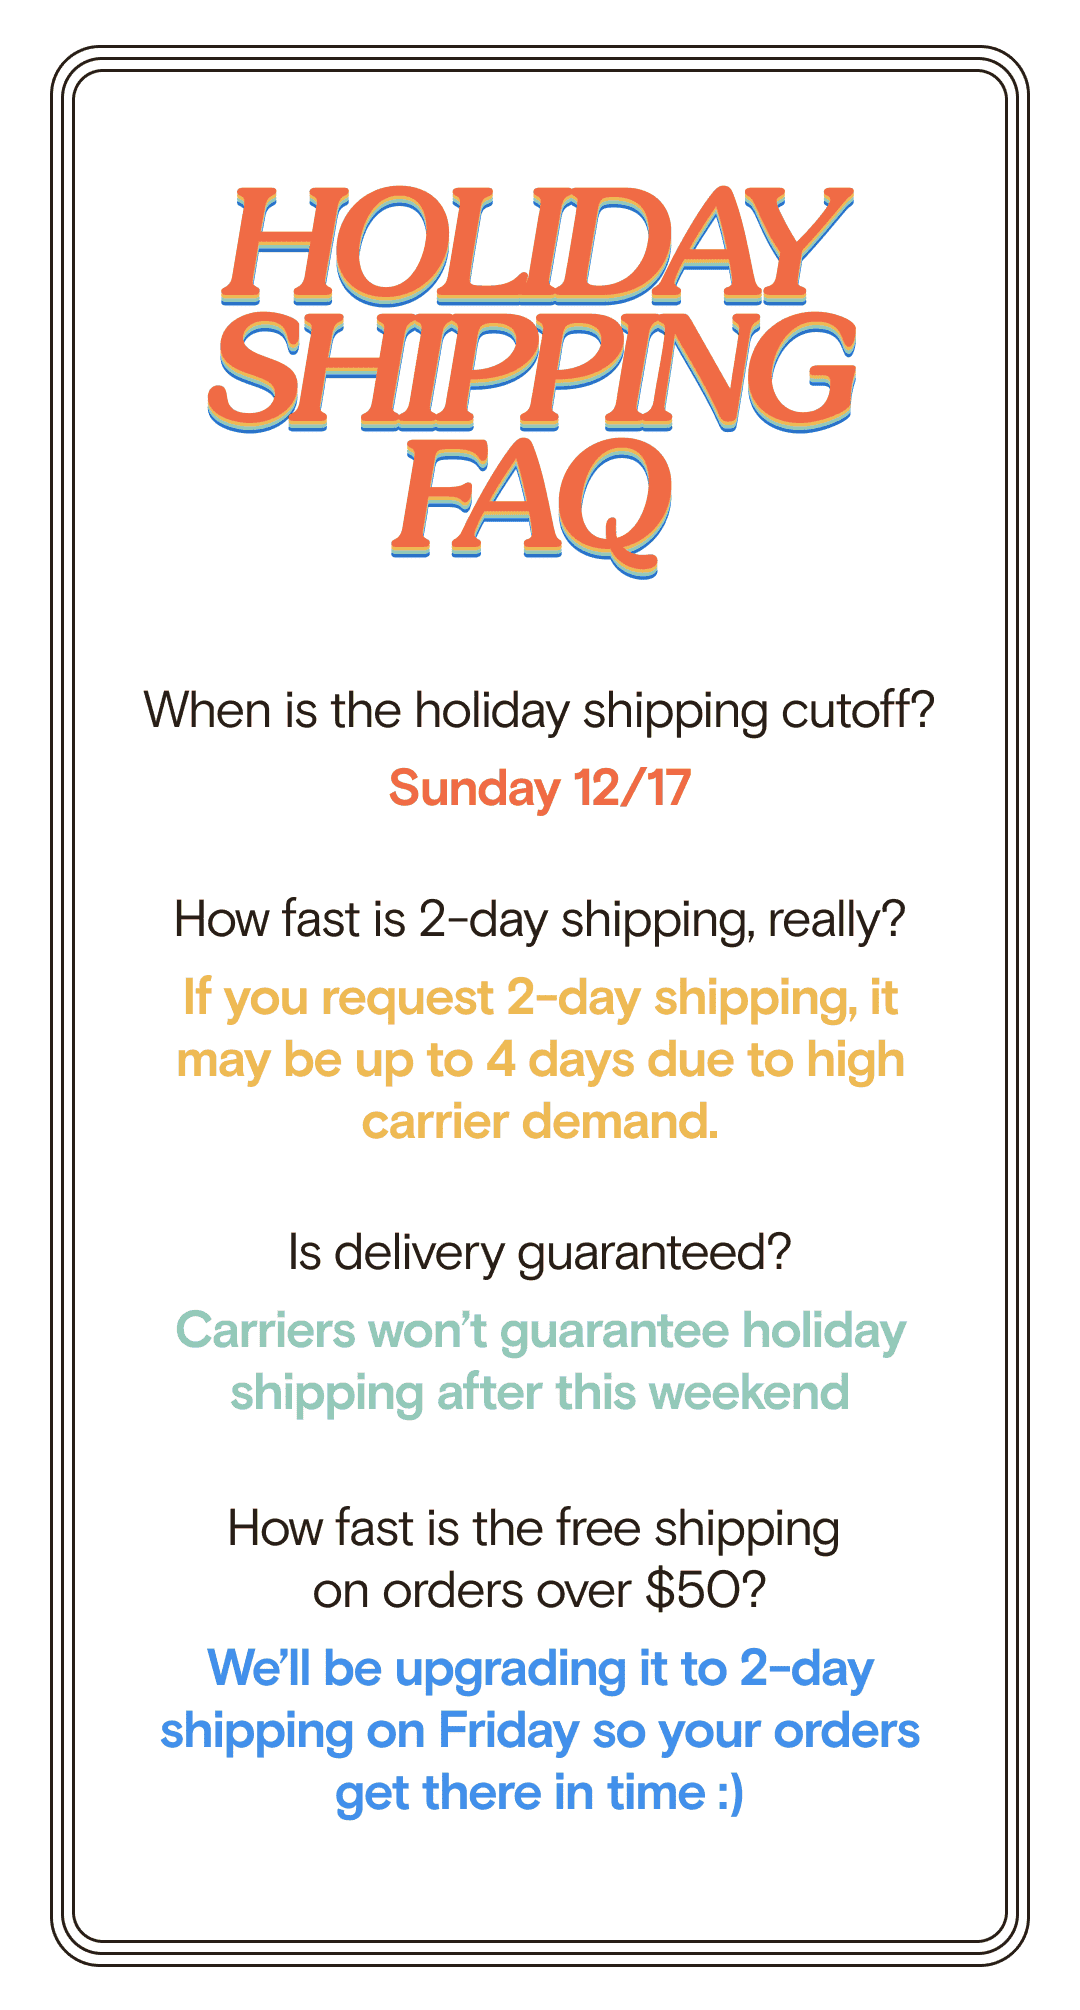 HOLIDAY SHIPPING FAQ When is the holiday shipping cutoff? Sunday 12/17 How fast is 2-day shipping, really? If you request 2-day shipping, it may be up to 4 days due to high carrier demand. Is delivery guaranteed? Carriers won’t guarantee holiday shipping after this weekend How fast is the free shipping  on orders over \\$50? We’ll be upgrading it to 2-day shipping so your orders get  there in time :)